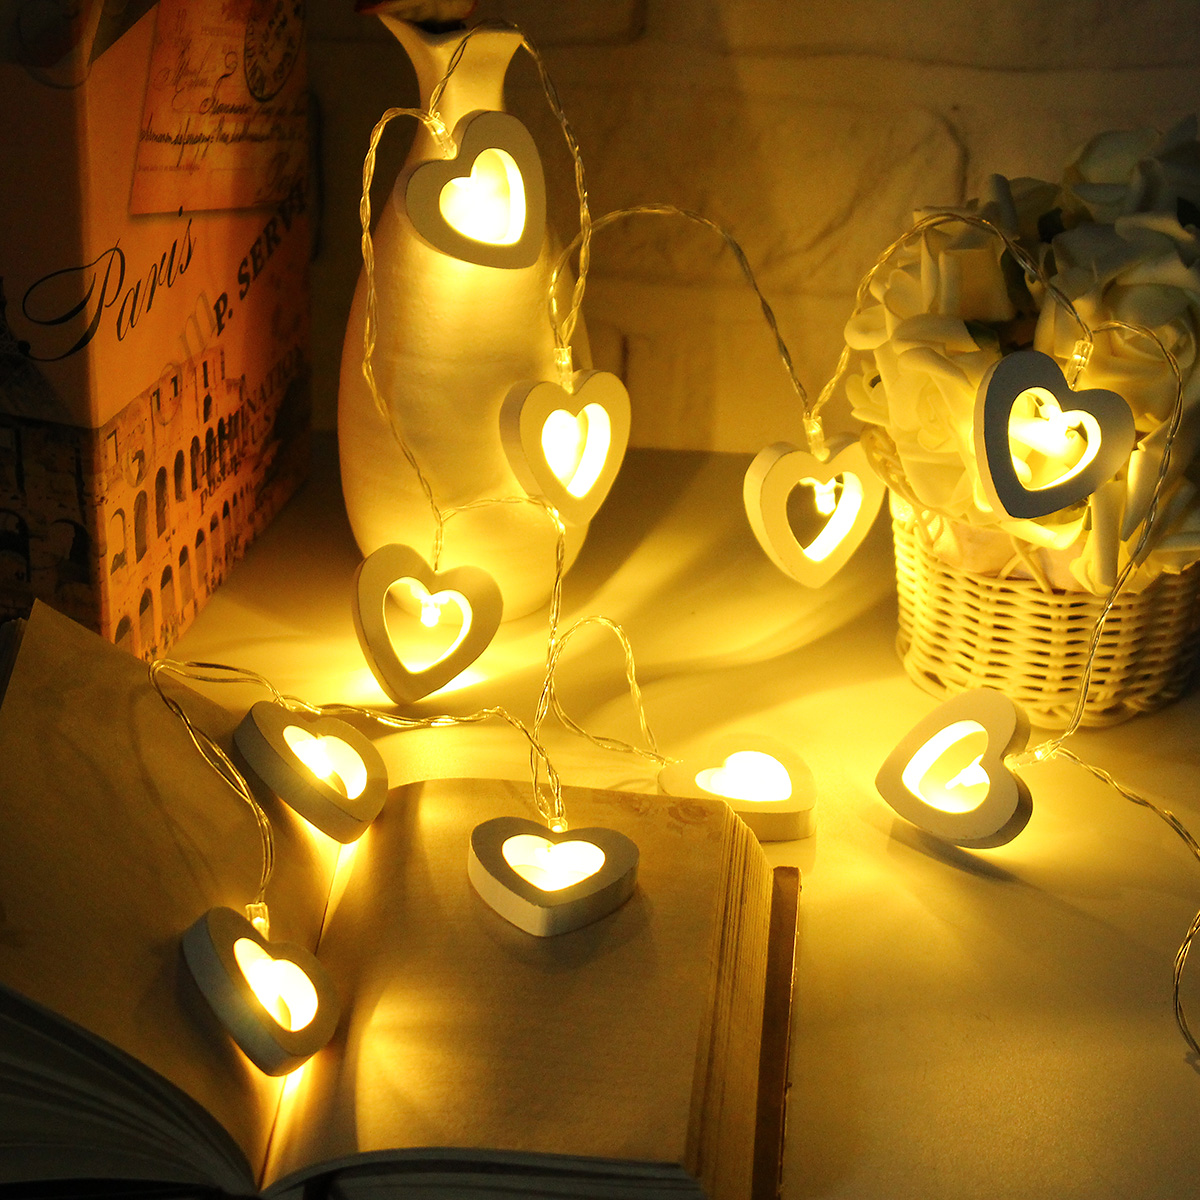 18M-03W-Wooden-Heart-Shape-Battery-Powered-10LED-Fairy-String-Light-for-Christmas-Home-Party-Decor-D-1630337-6